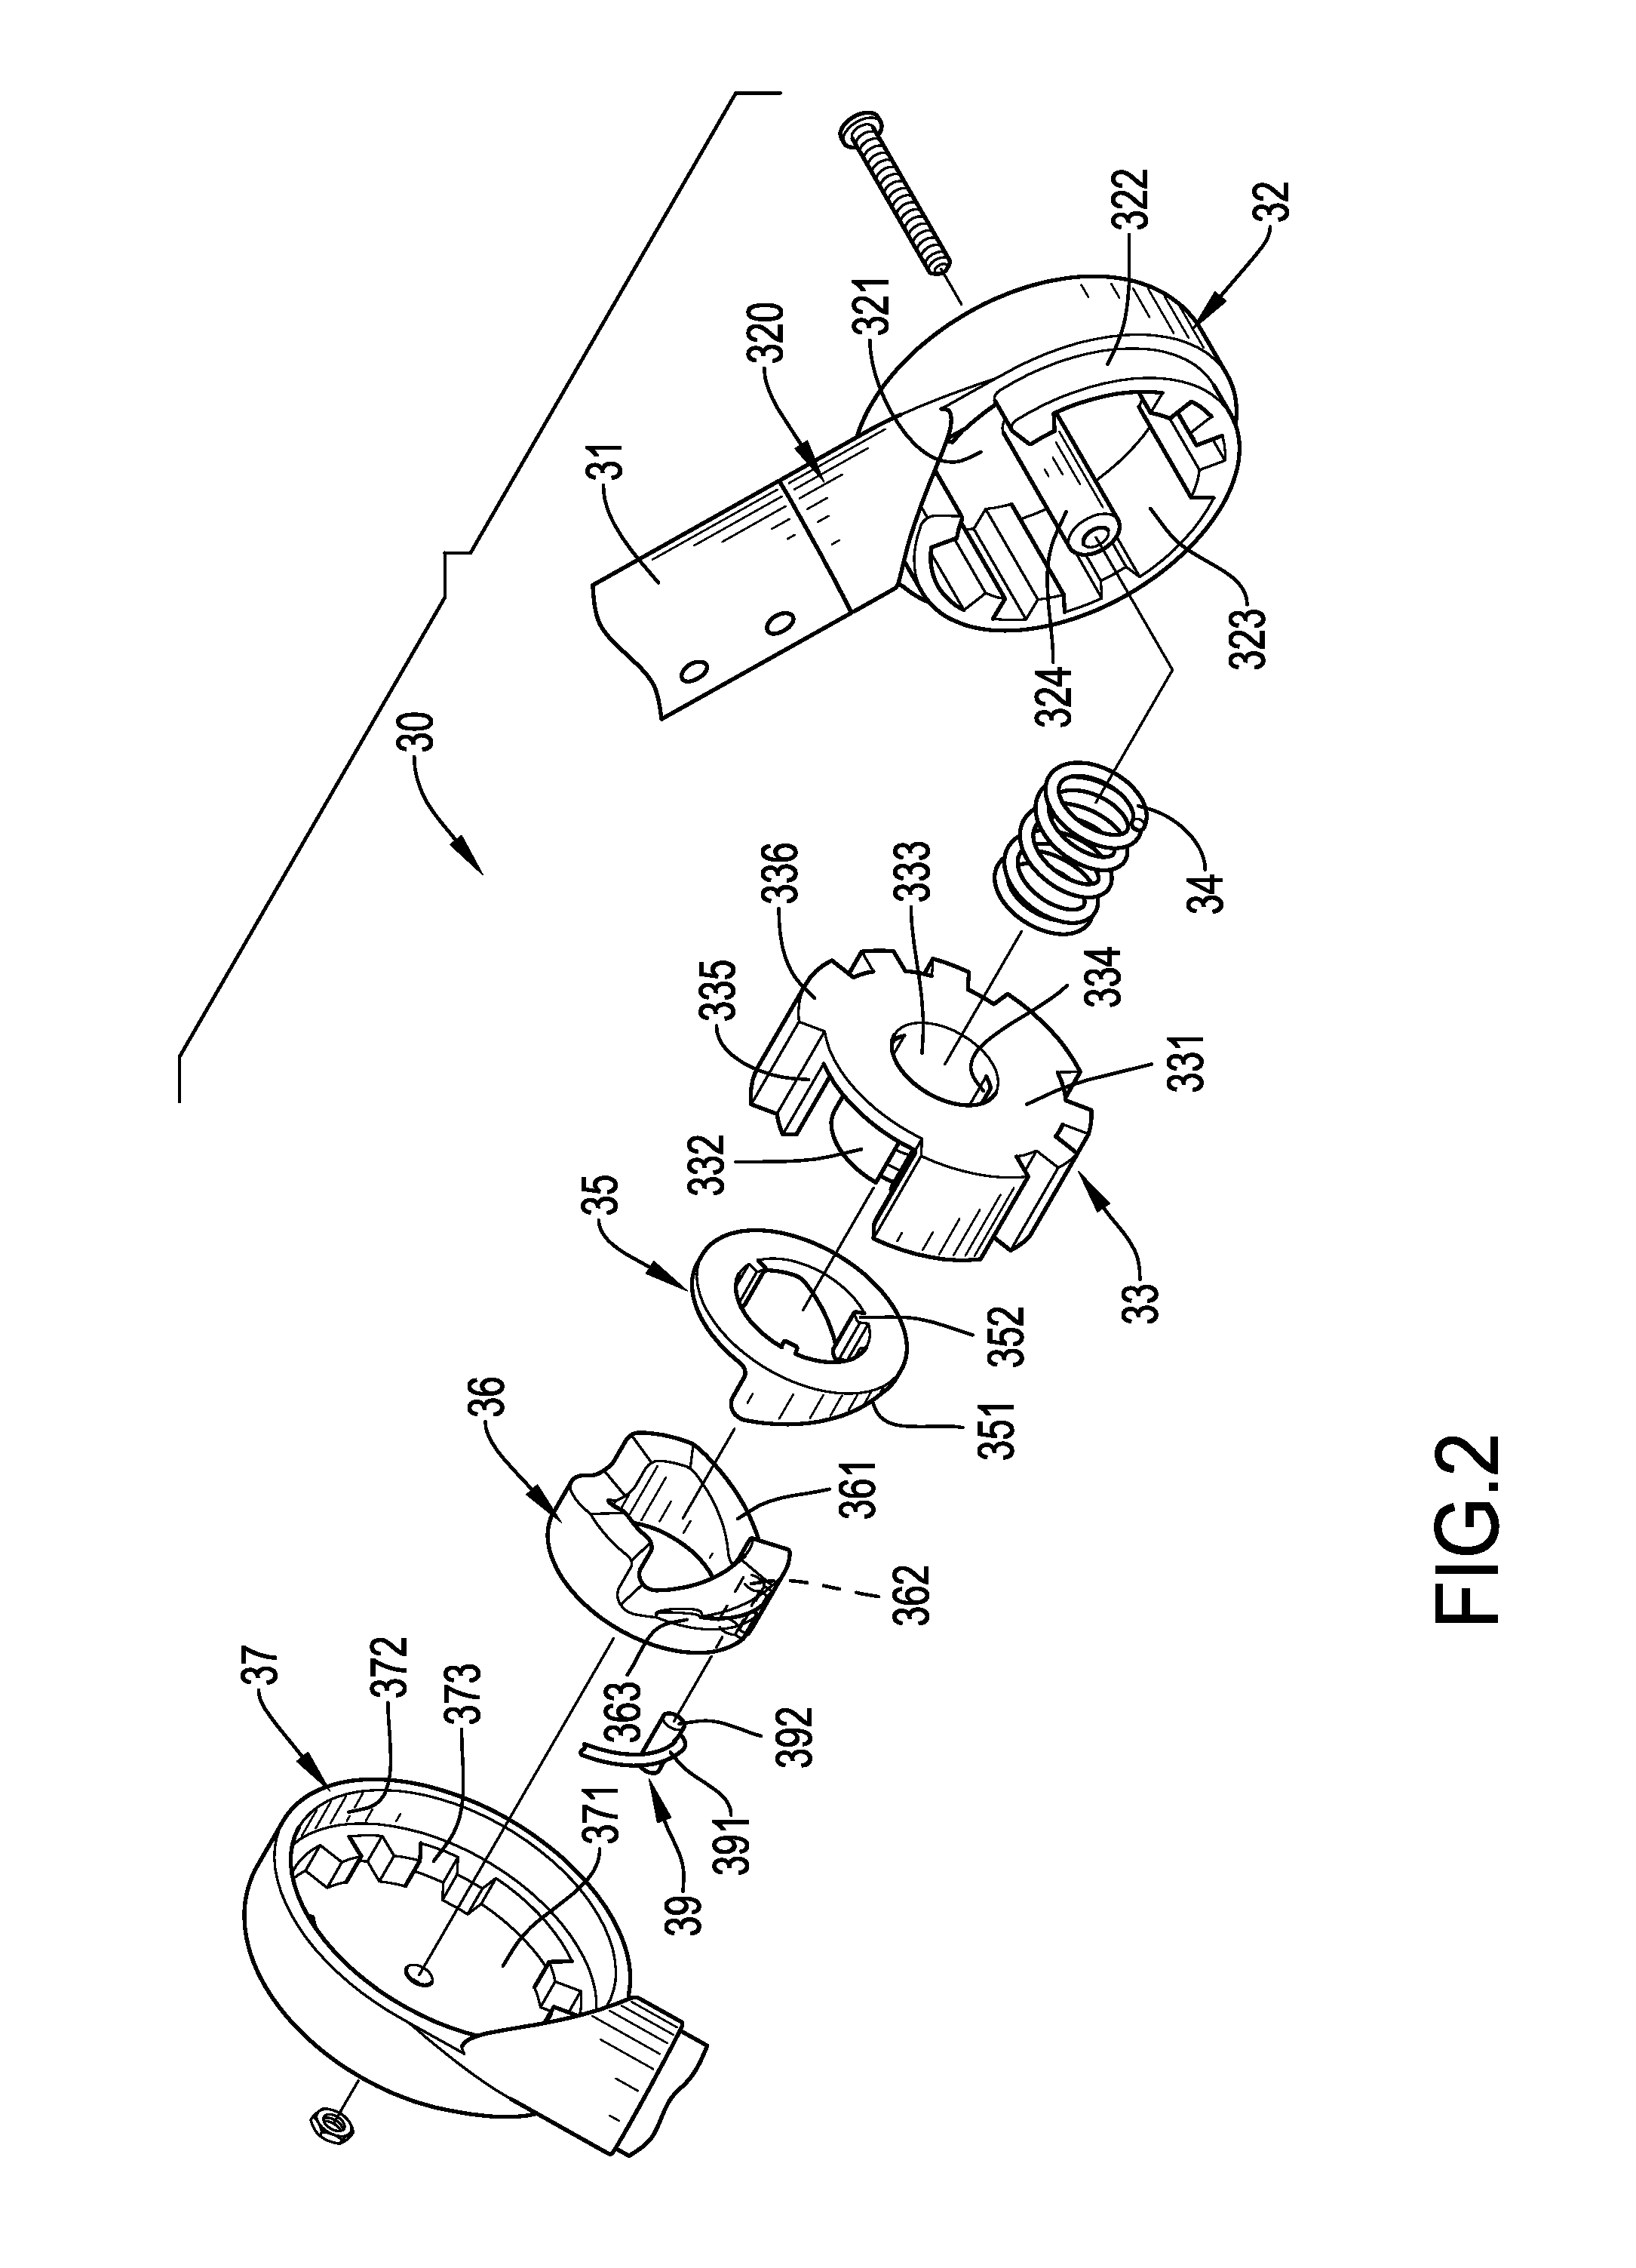 Folding device for baby carriage